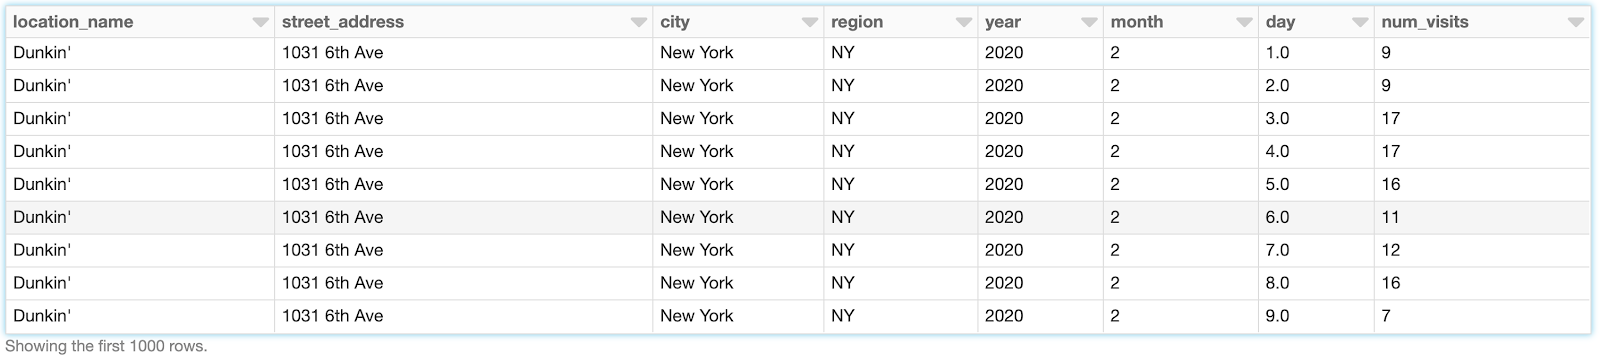 Example table demonstrating the use of alternative geolocation data to analyze the effectiveness of marketing promotion.